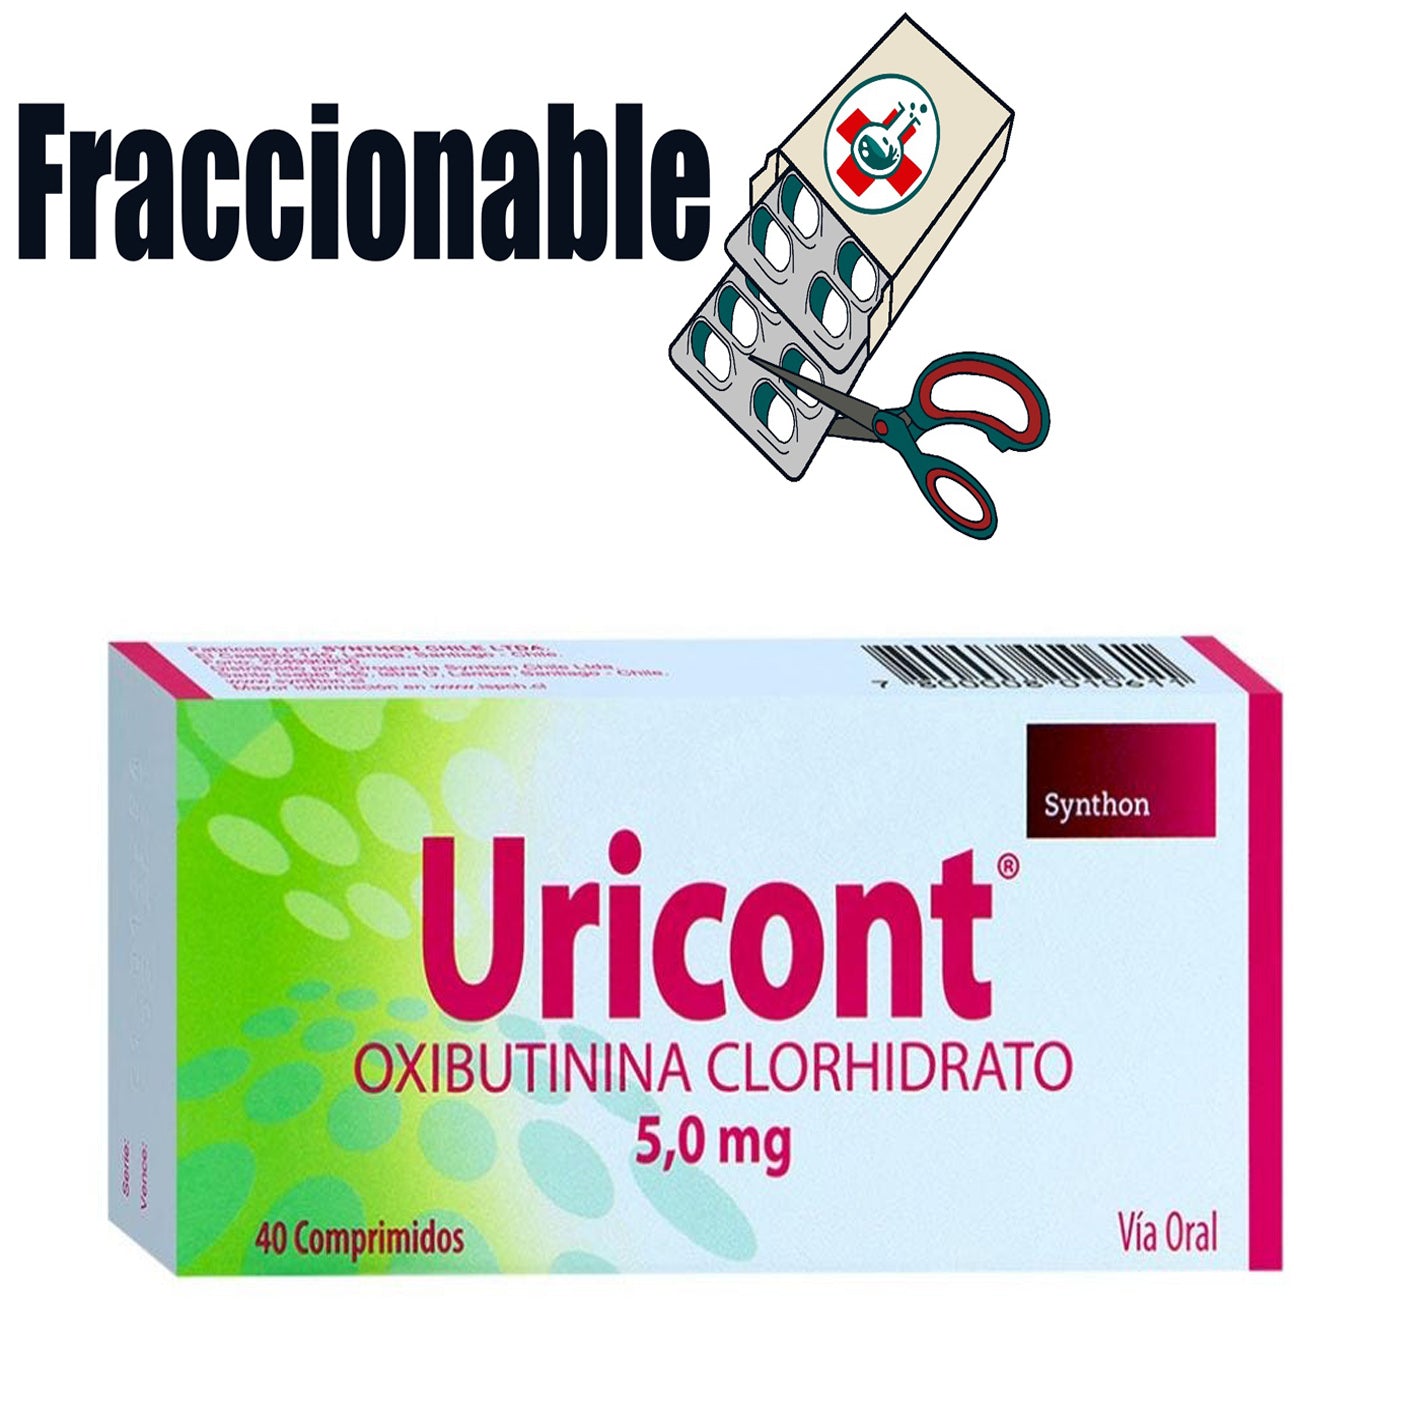 Uricont 5mg x 20 Comprimidos